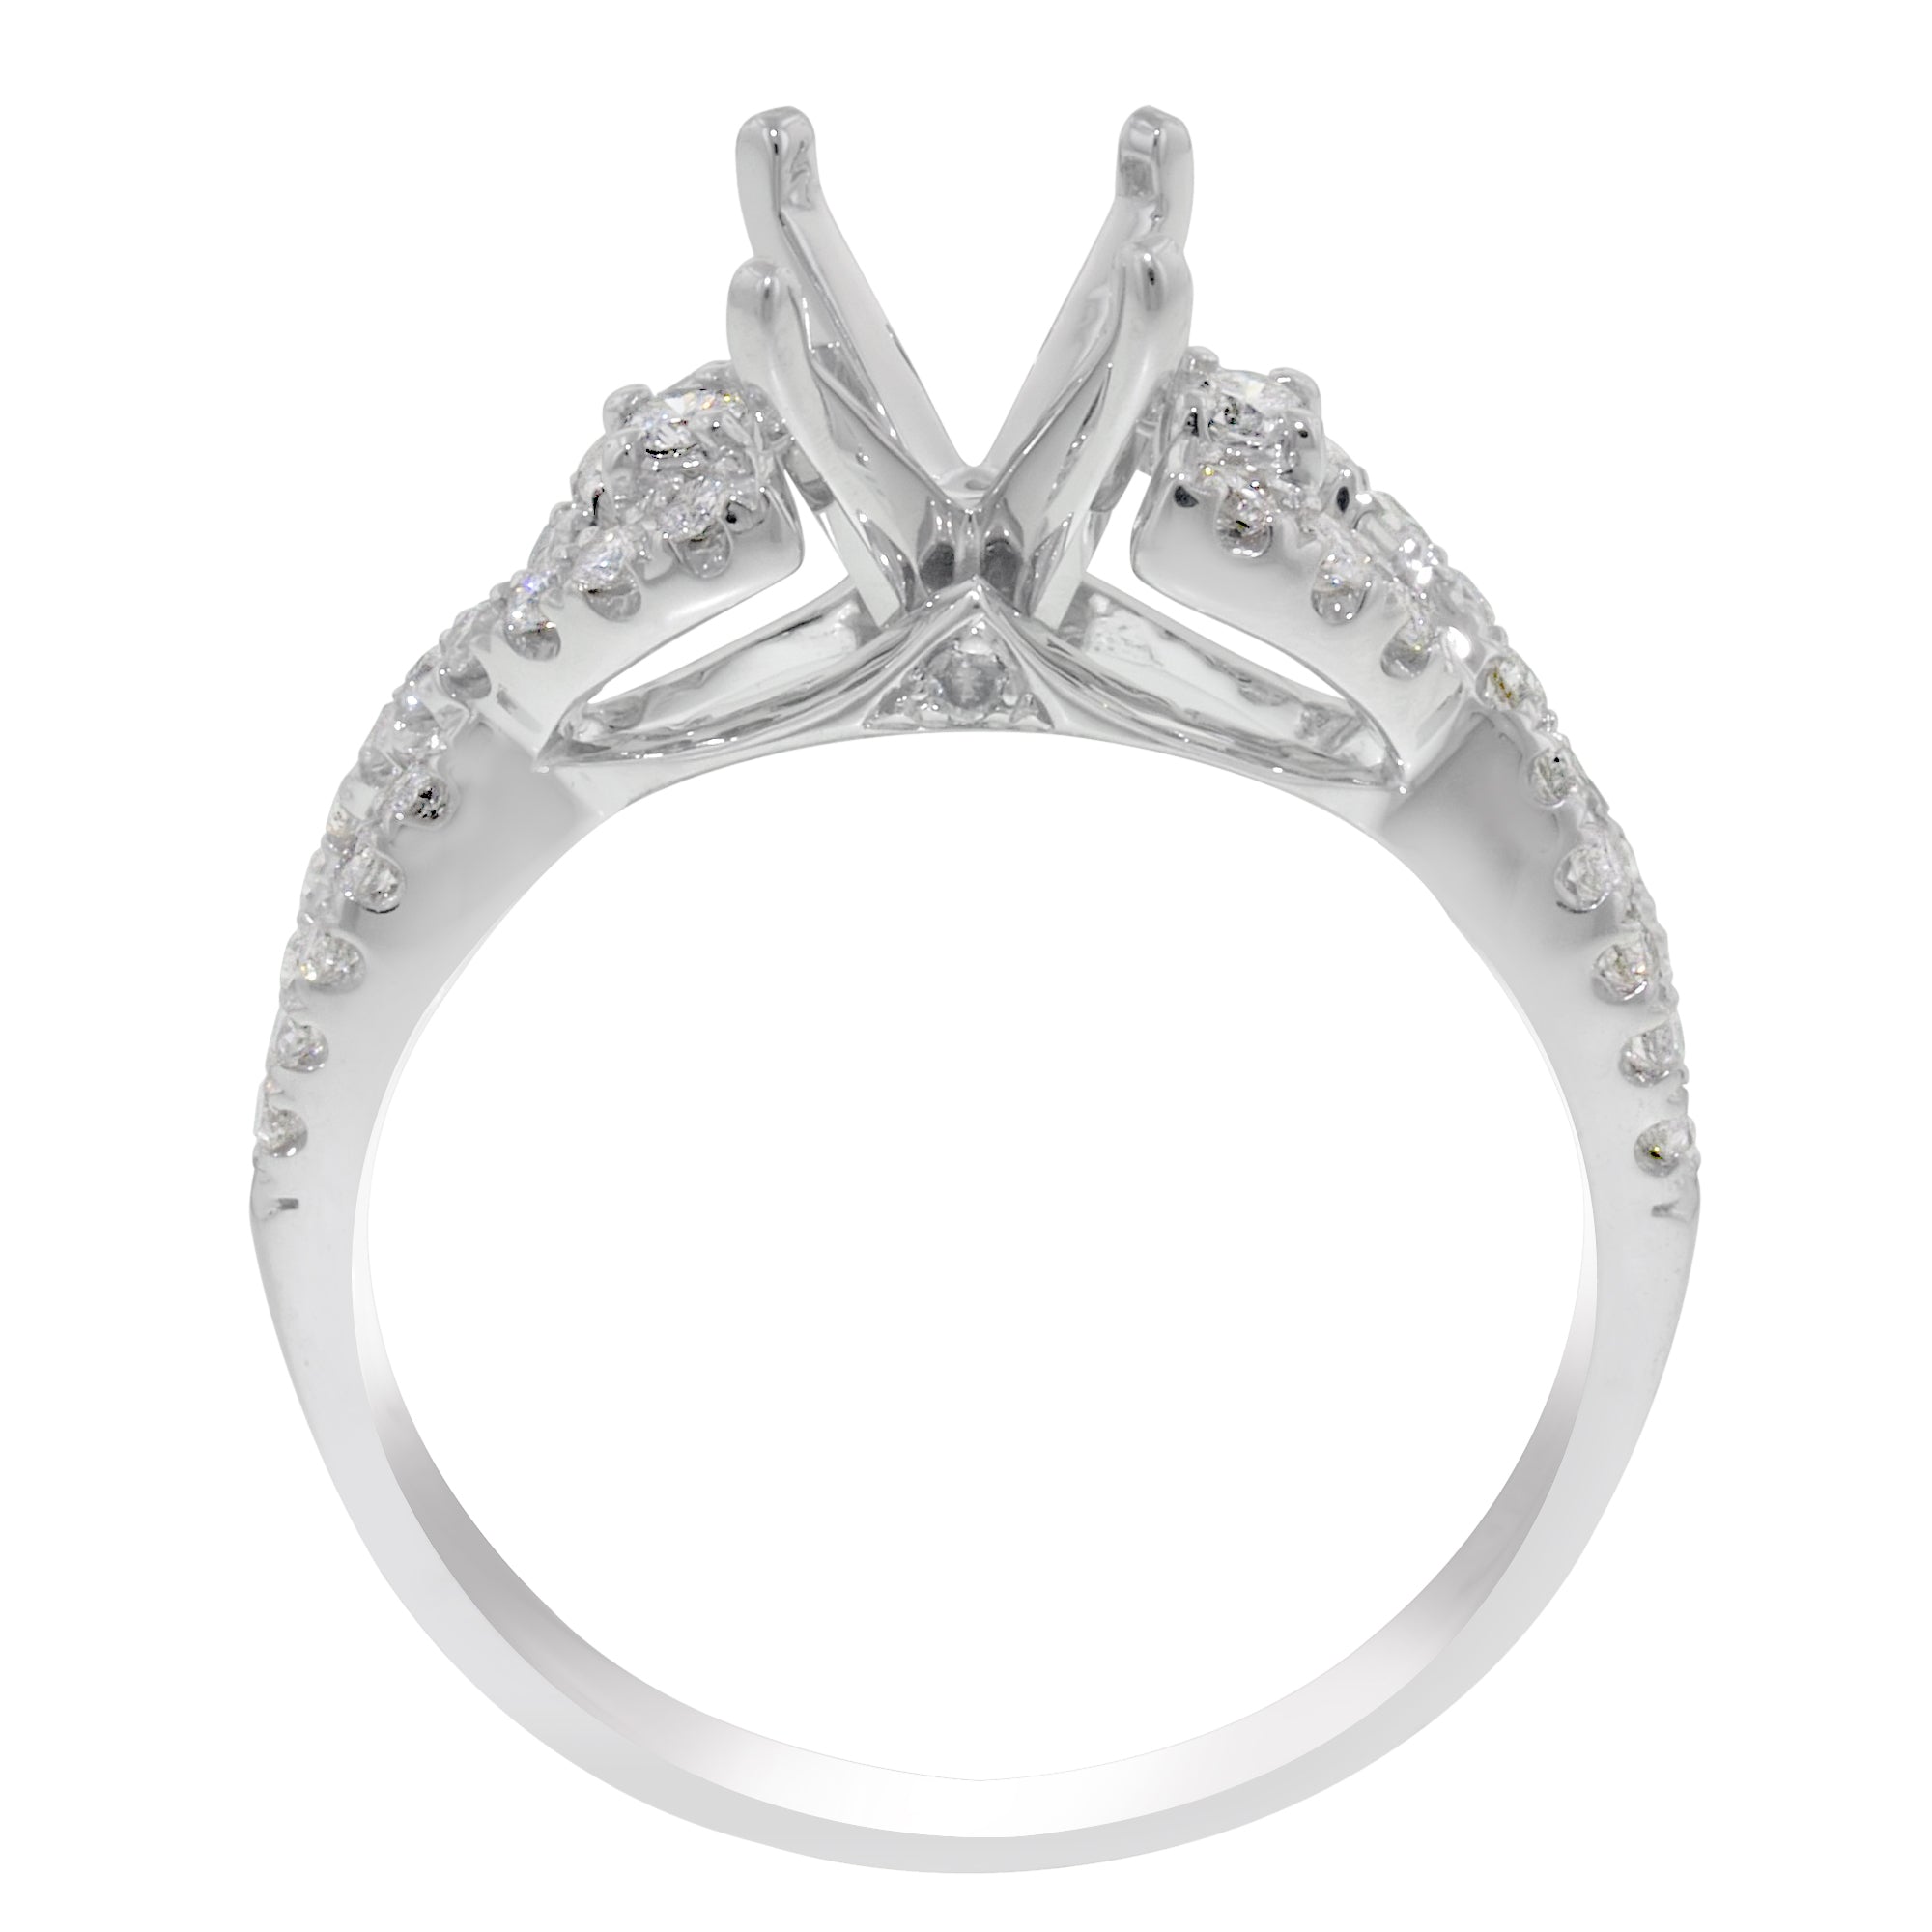 Daydream Diamond Setting in 14kt White Gold (3/8ct tw)